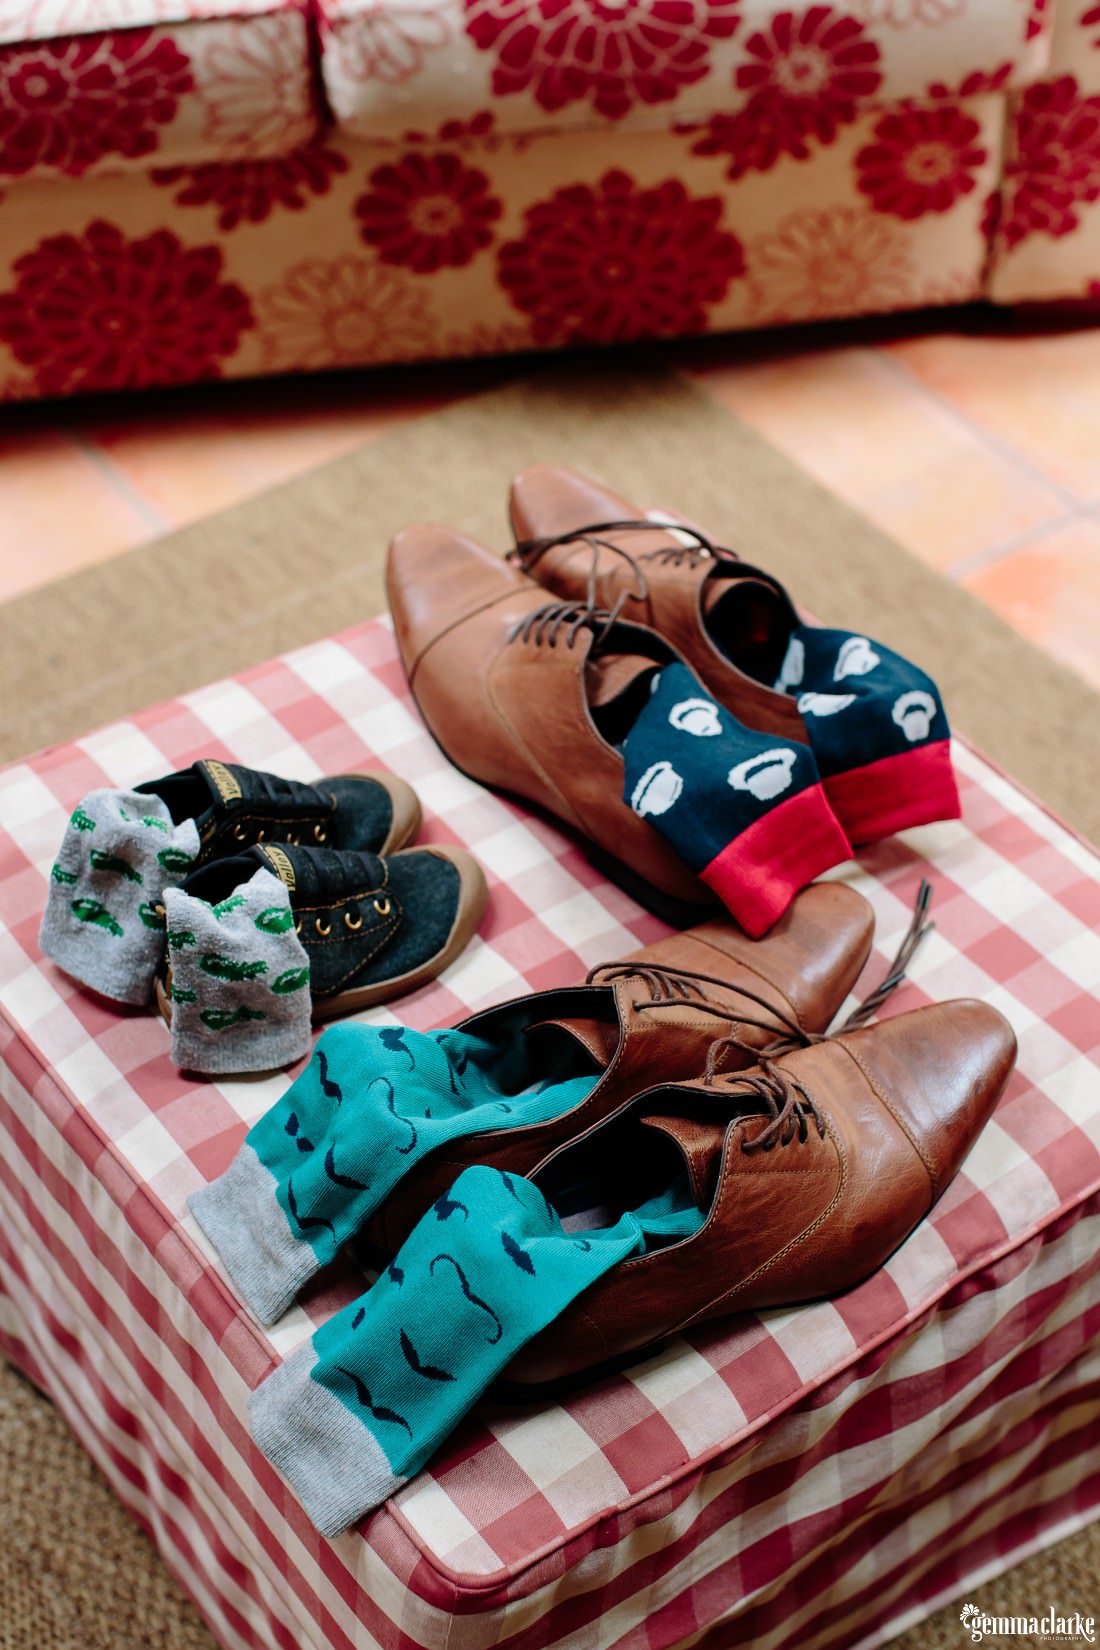 Two pairs of brown male adult shoes with socks and a small pair of young boys shoes and socks